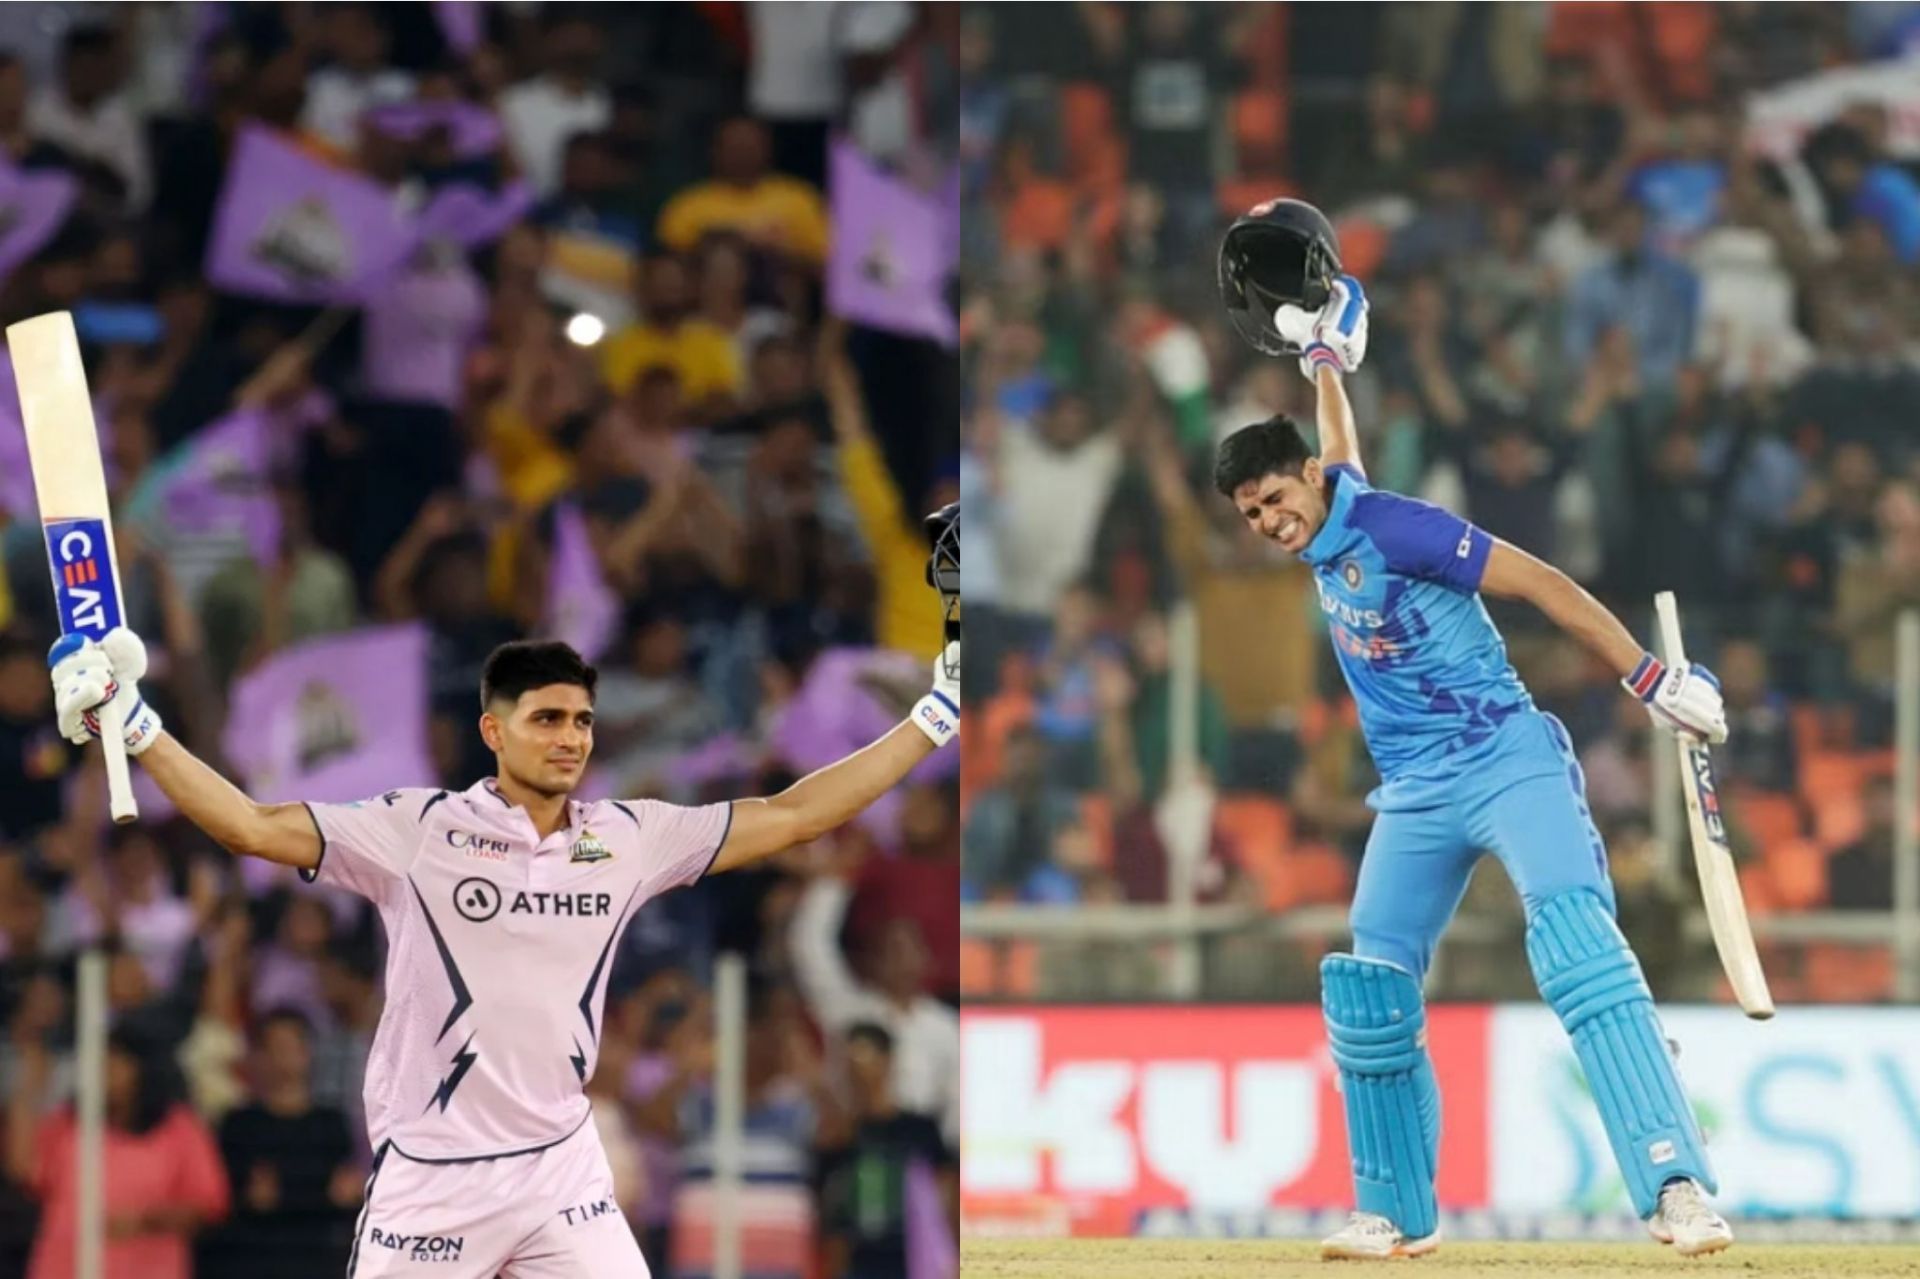 Shubman Gill has hit a IPL ton and a T20I ton in Ahmedabad